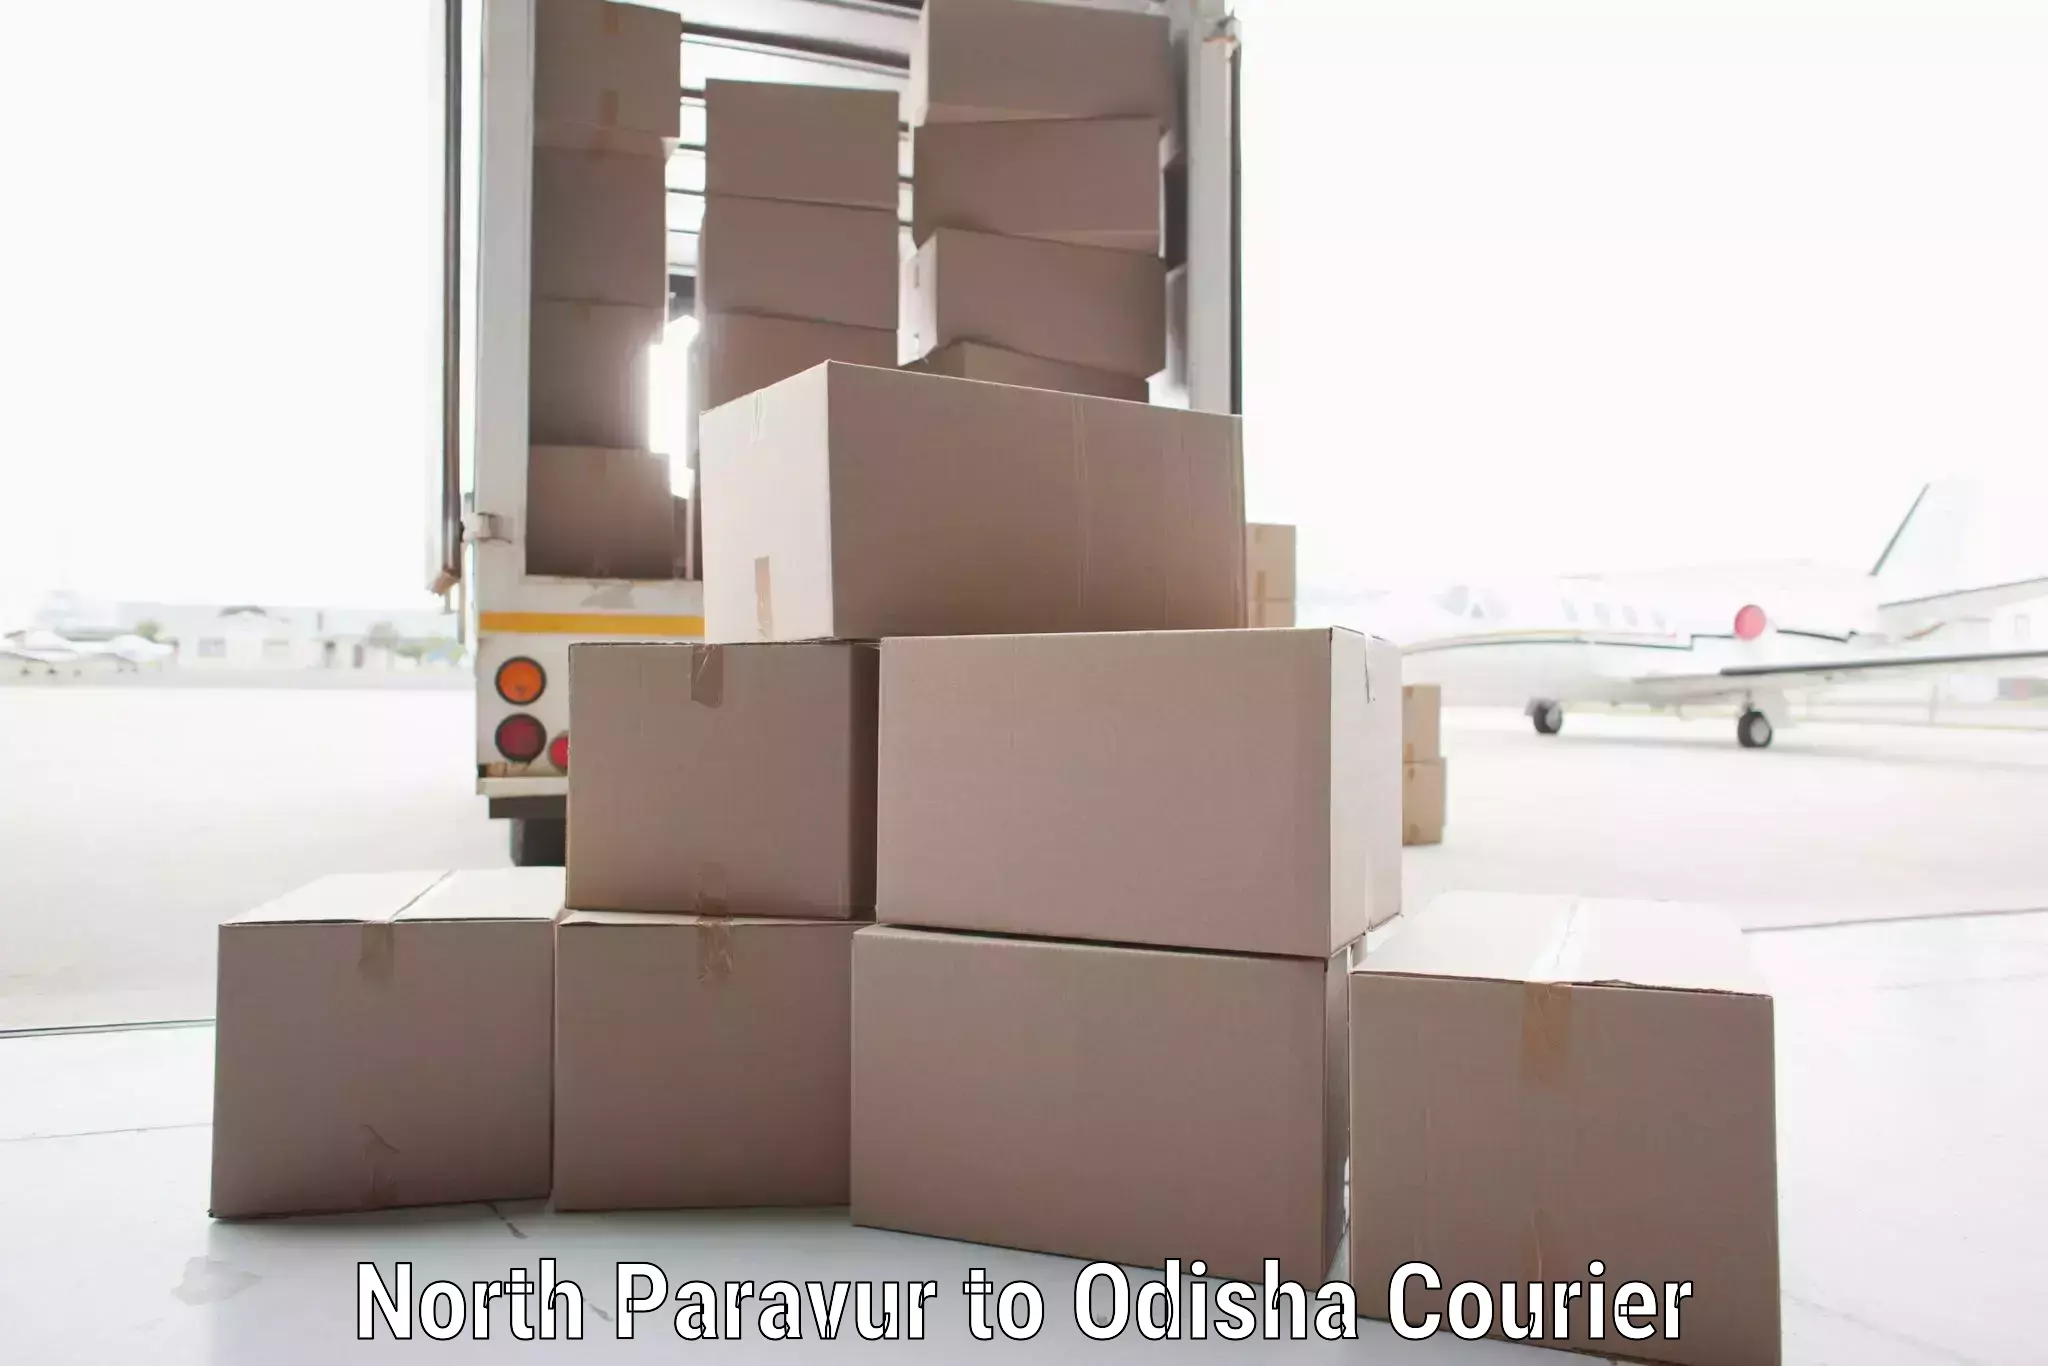 Emergency parcel delivery in North Paravur to Titilagarh